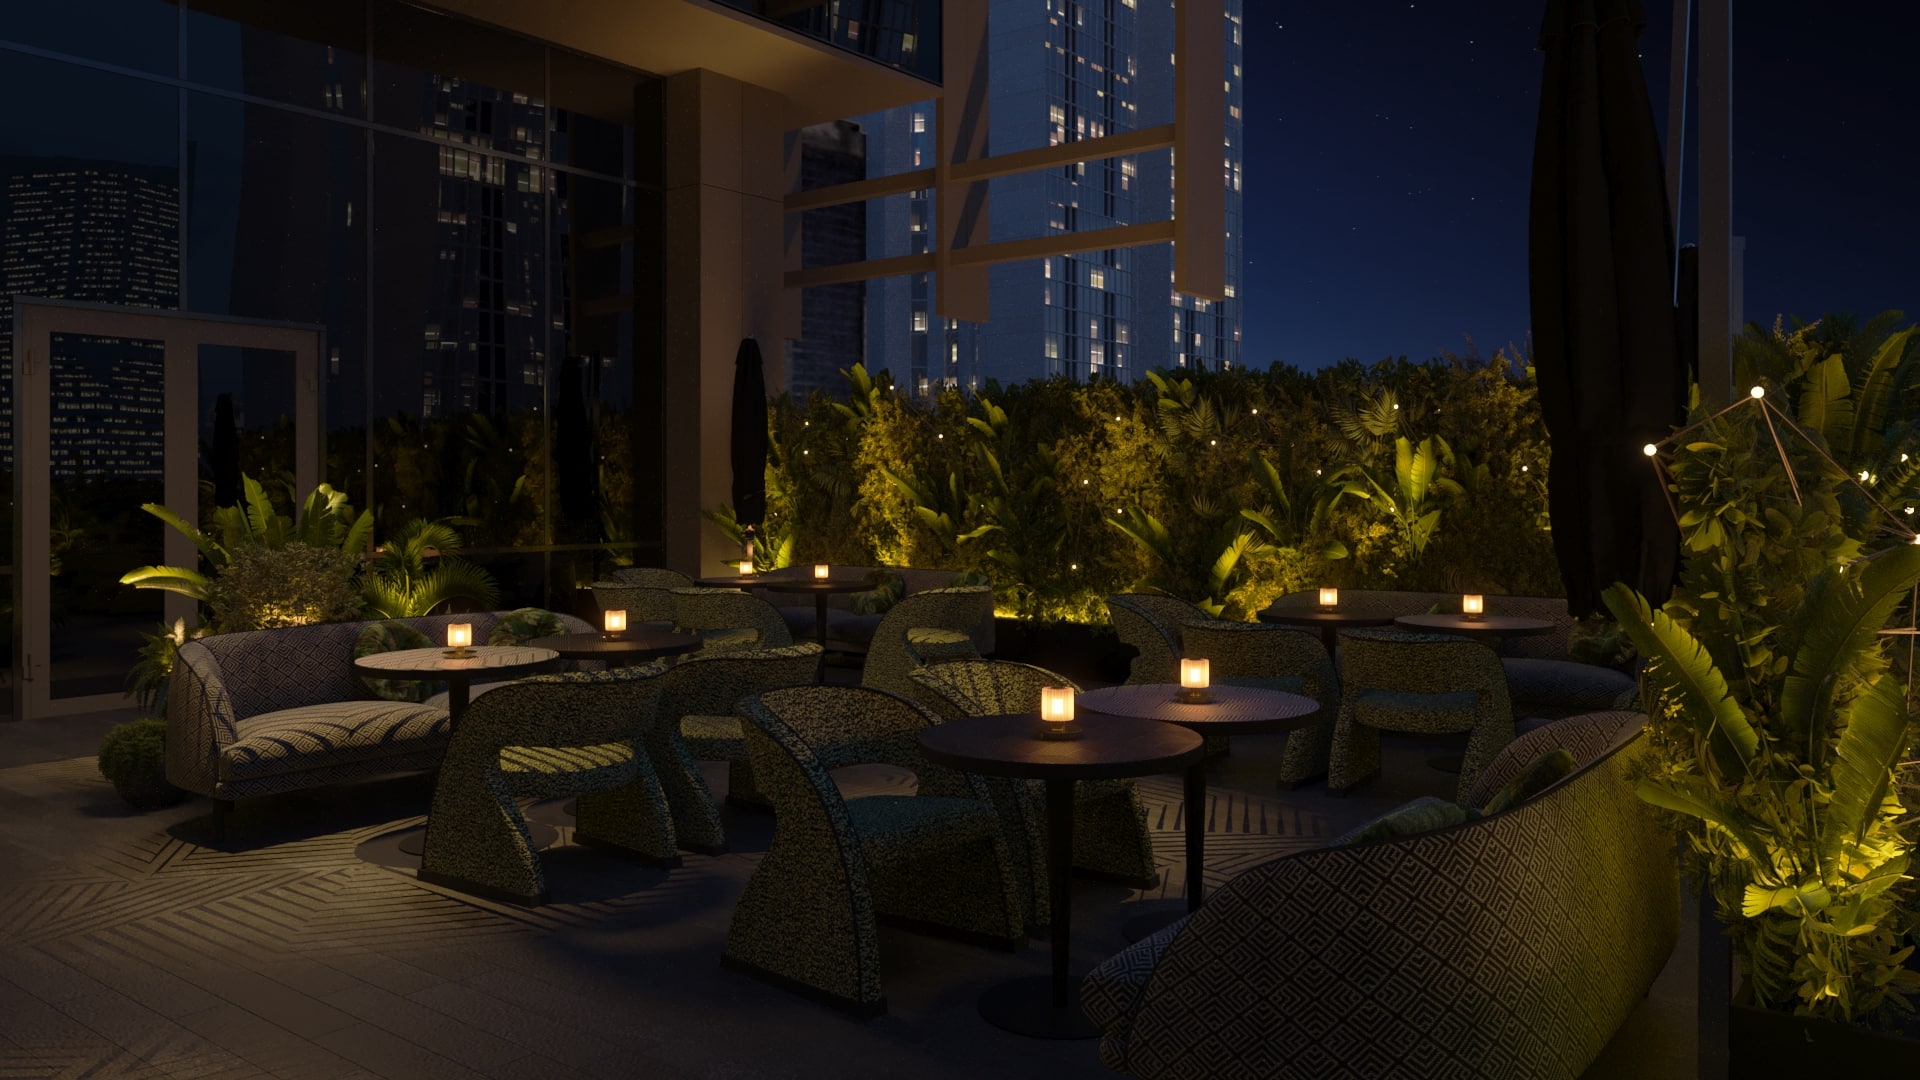 FOUR SEASONS HOTEL DIFC UNVEILS NEWLY RENOVATED TERRACES FOR THE UPCOMING SEASON